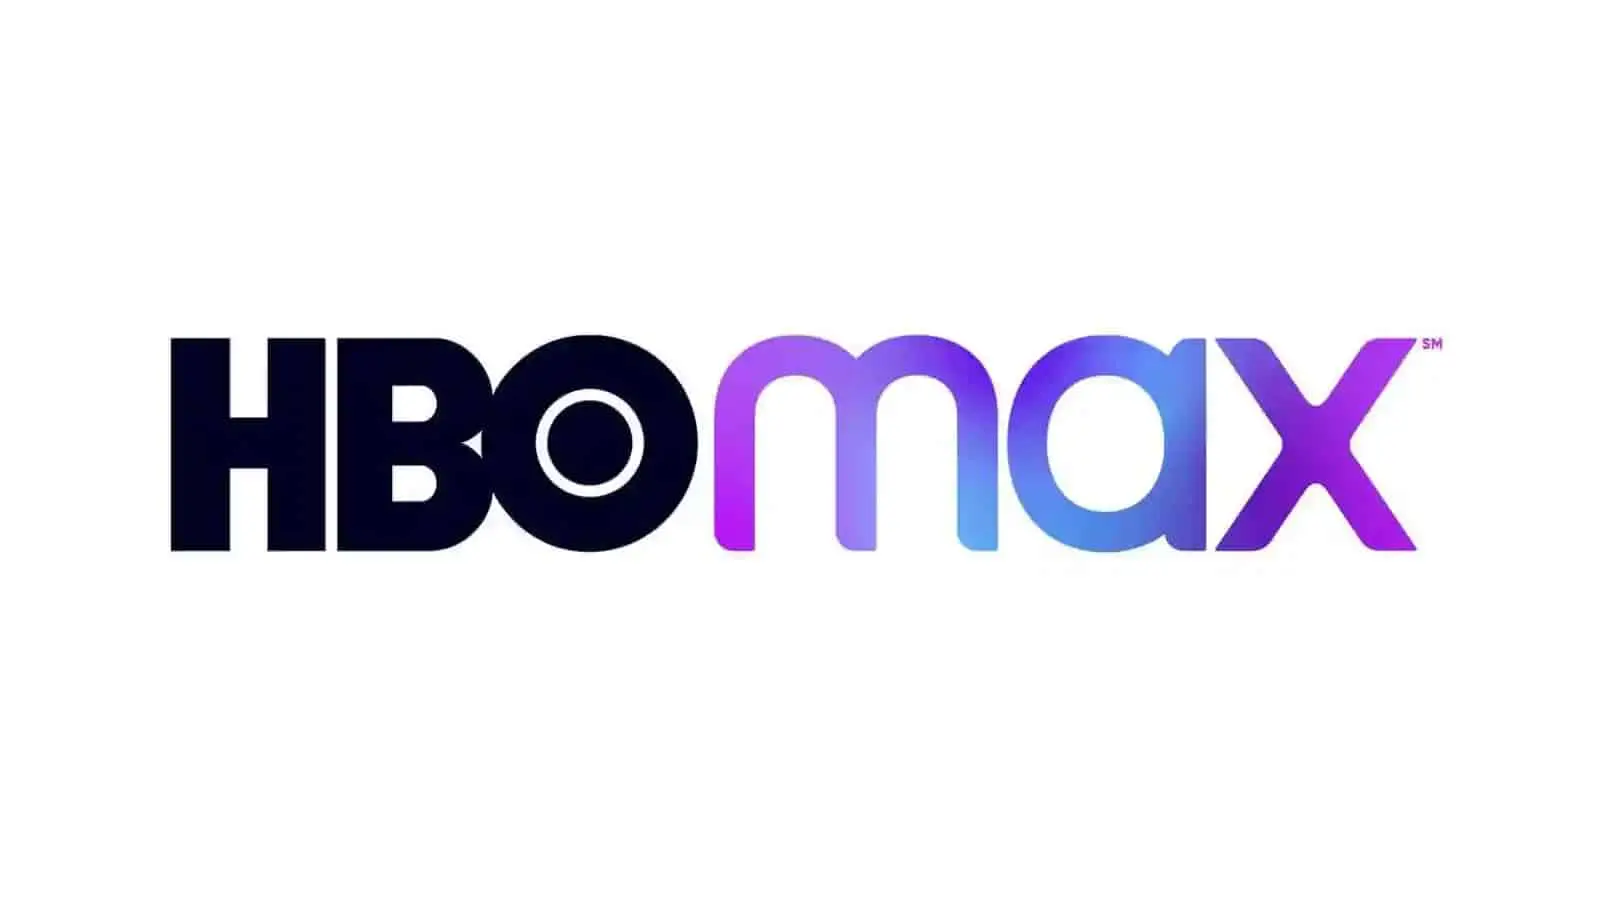 Get a discount on HBO Max?